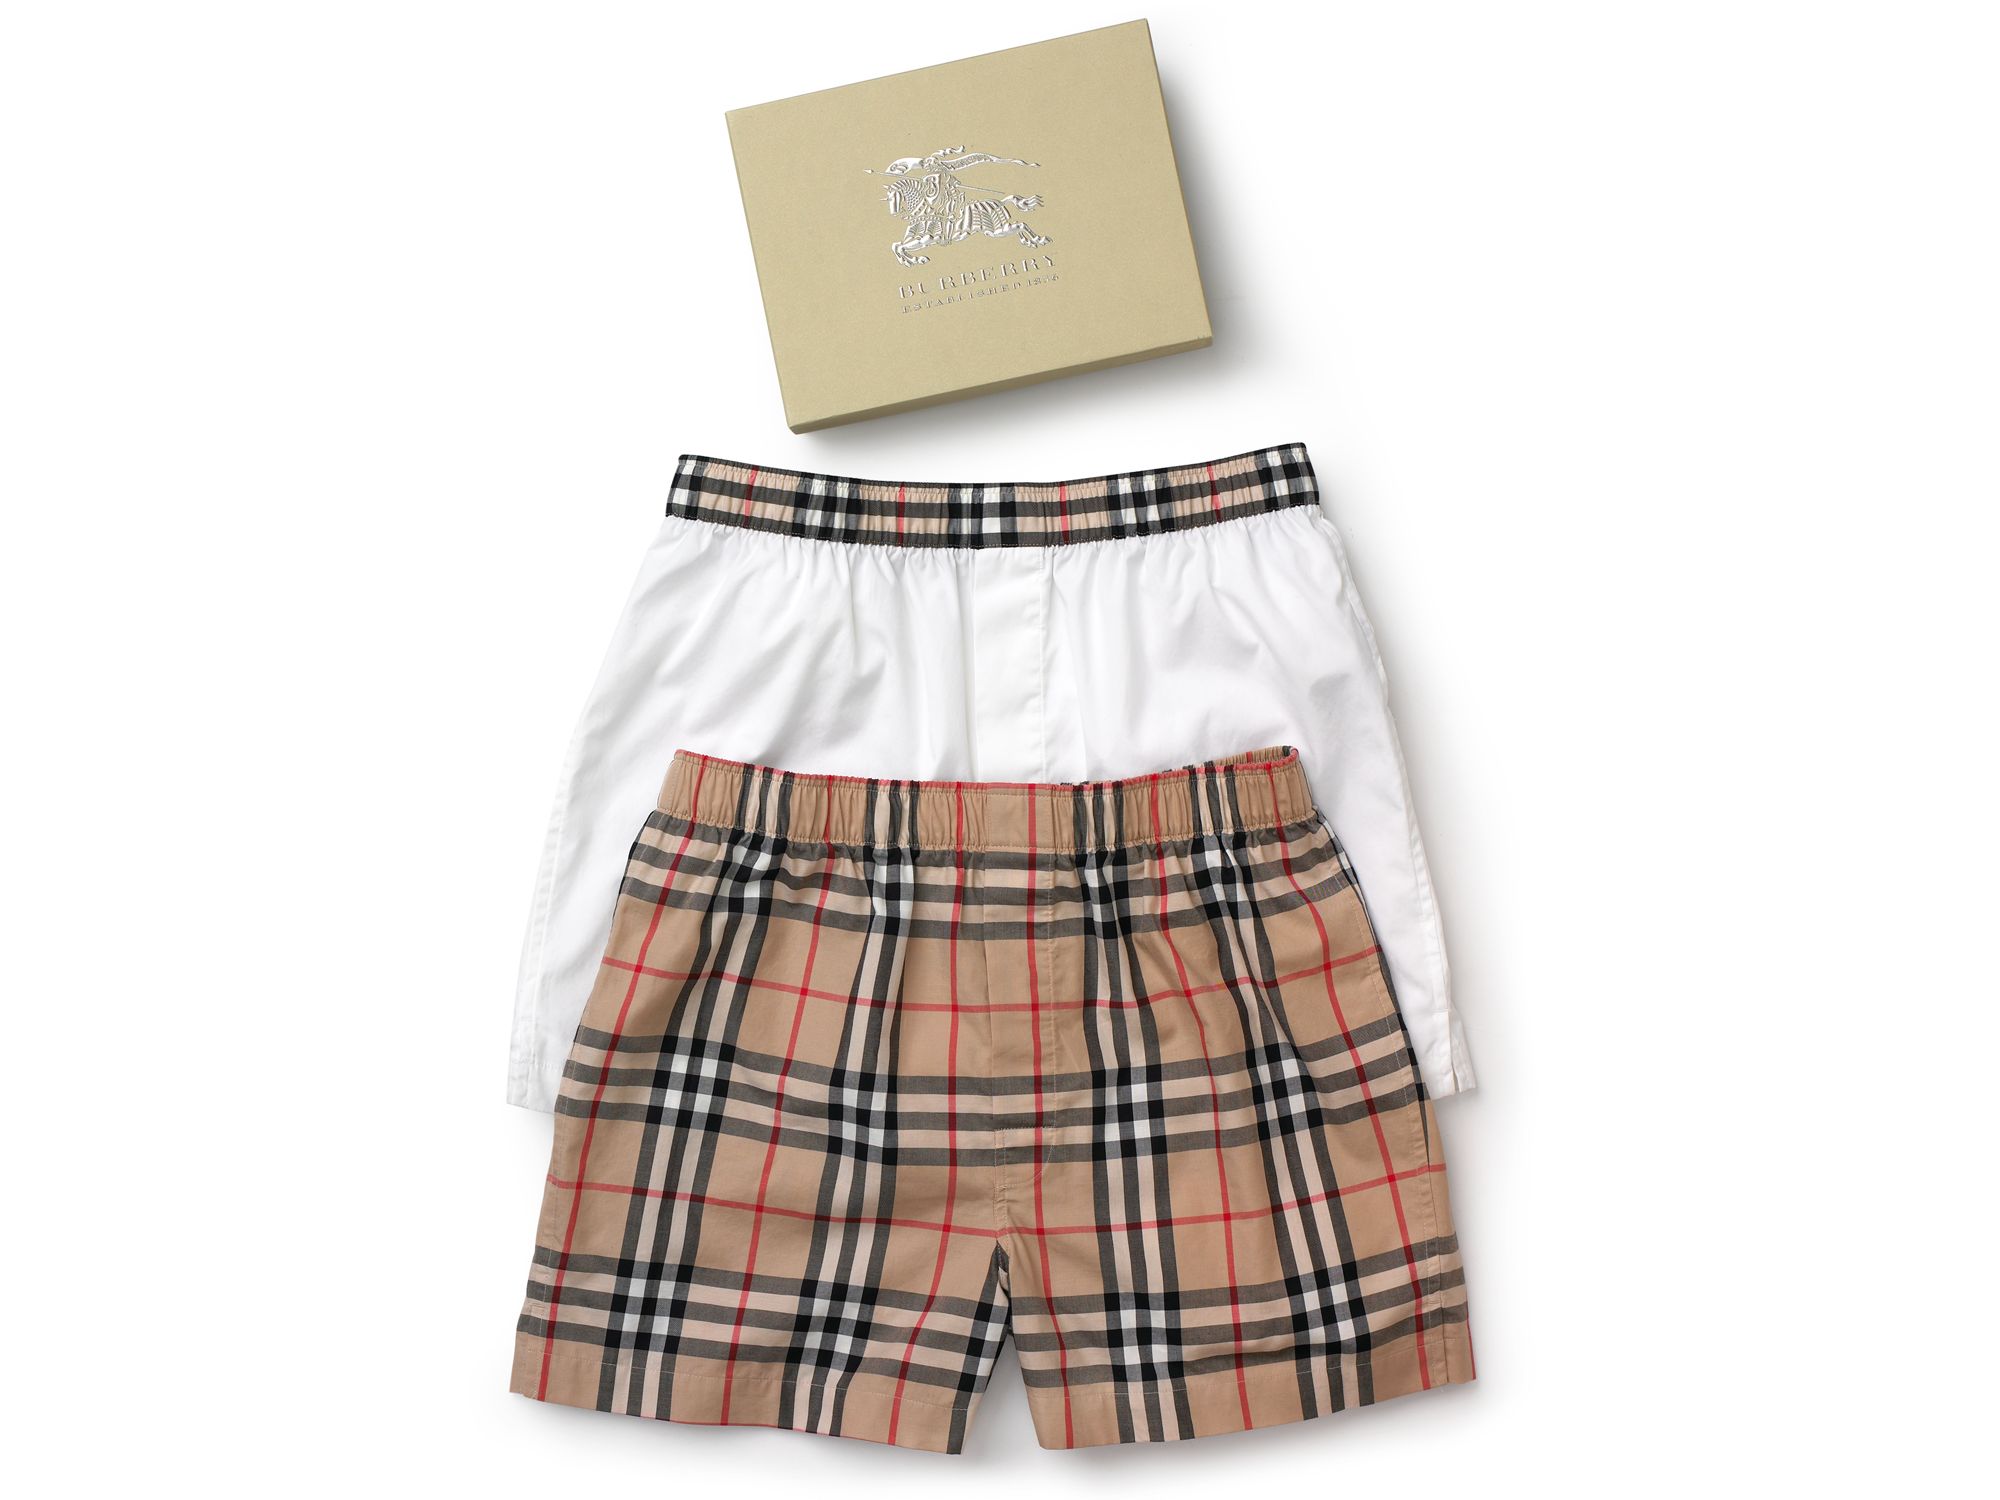 Burberry 2 Pack Boxers Gift Set for Men | Lyst